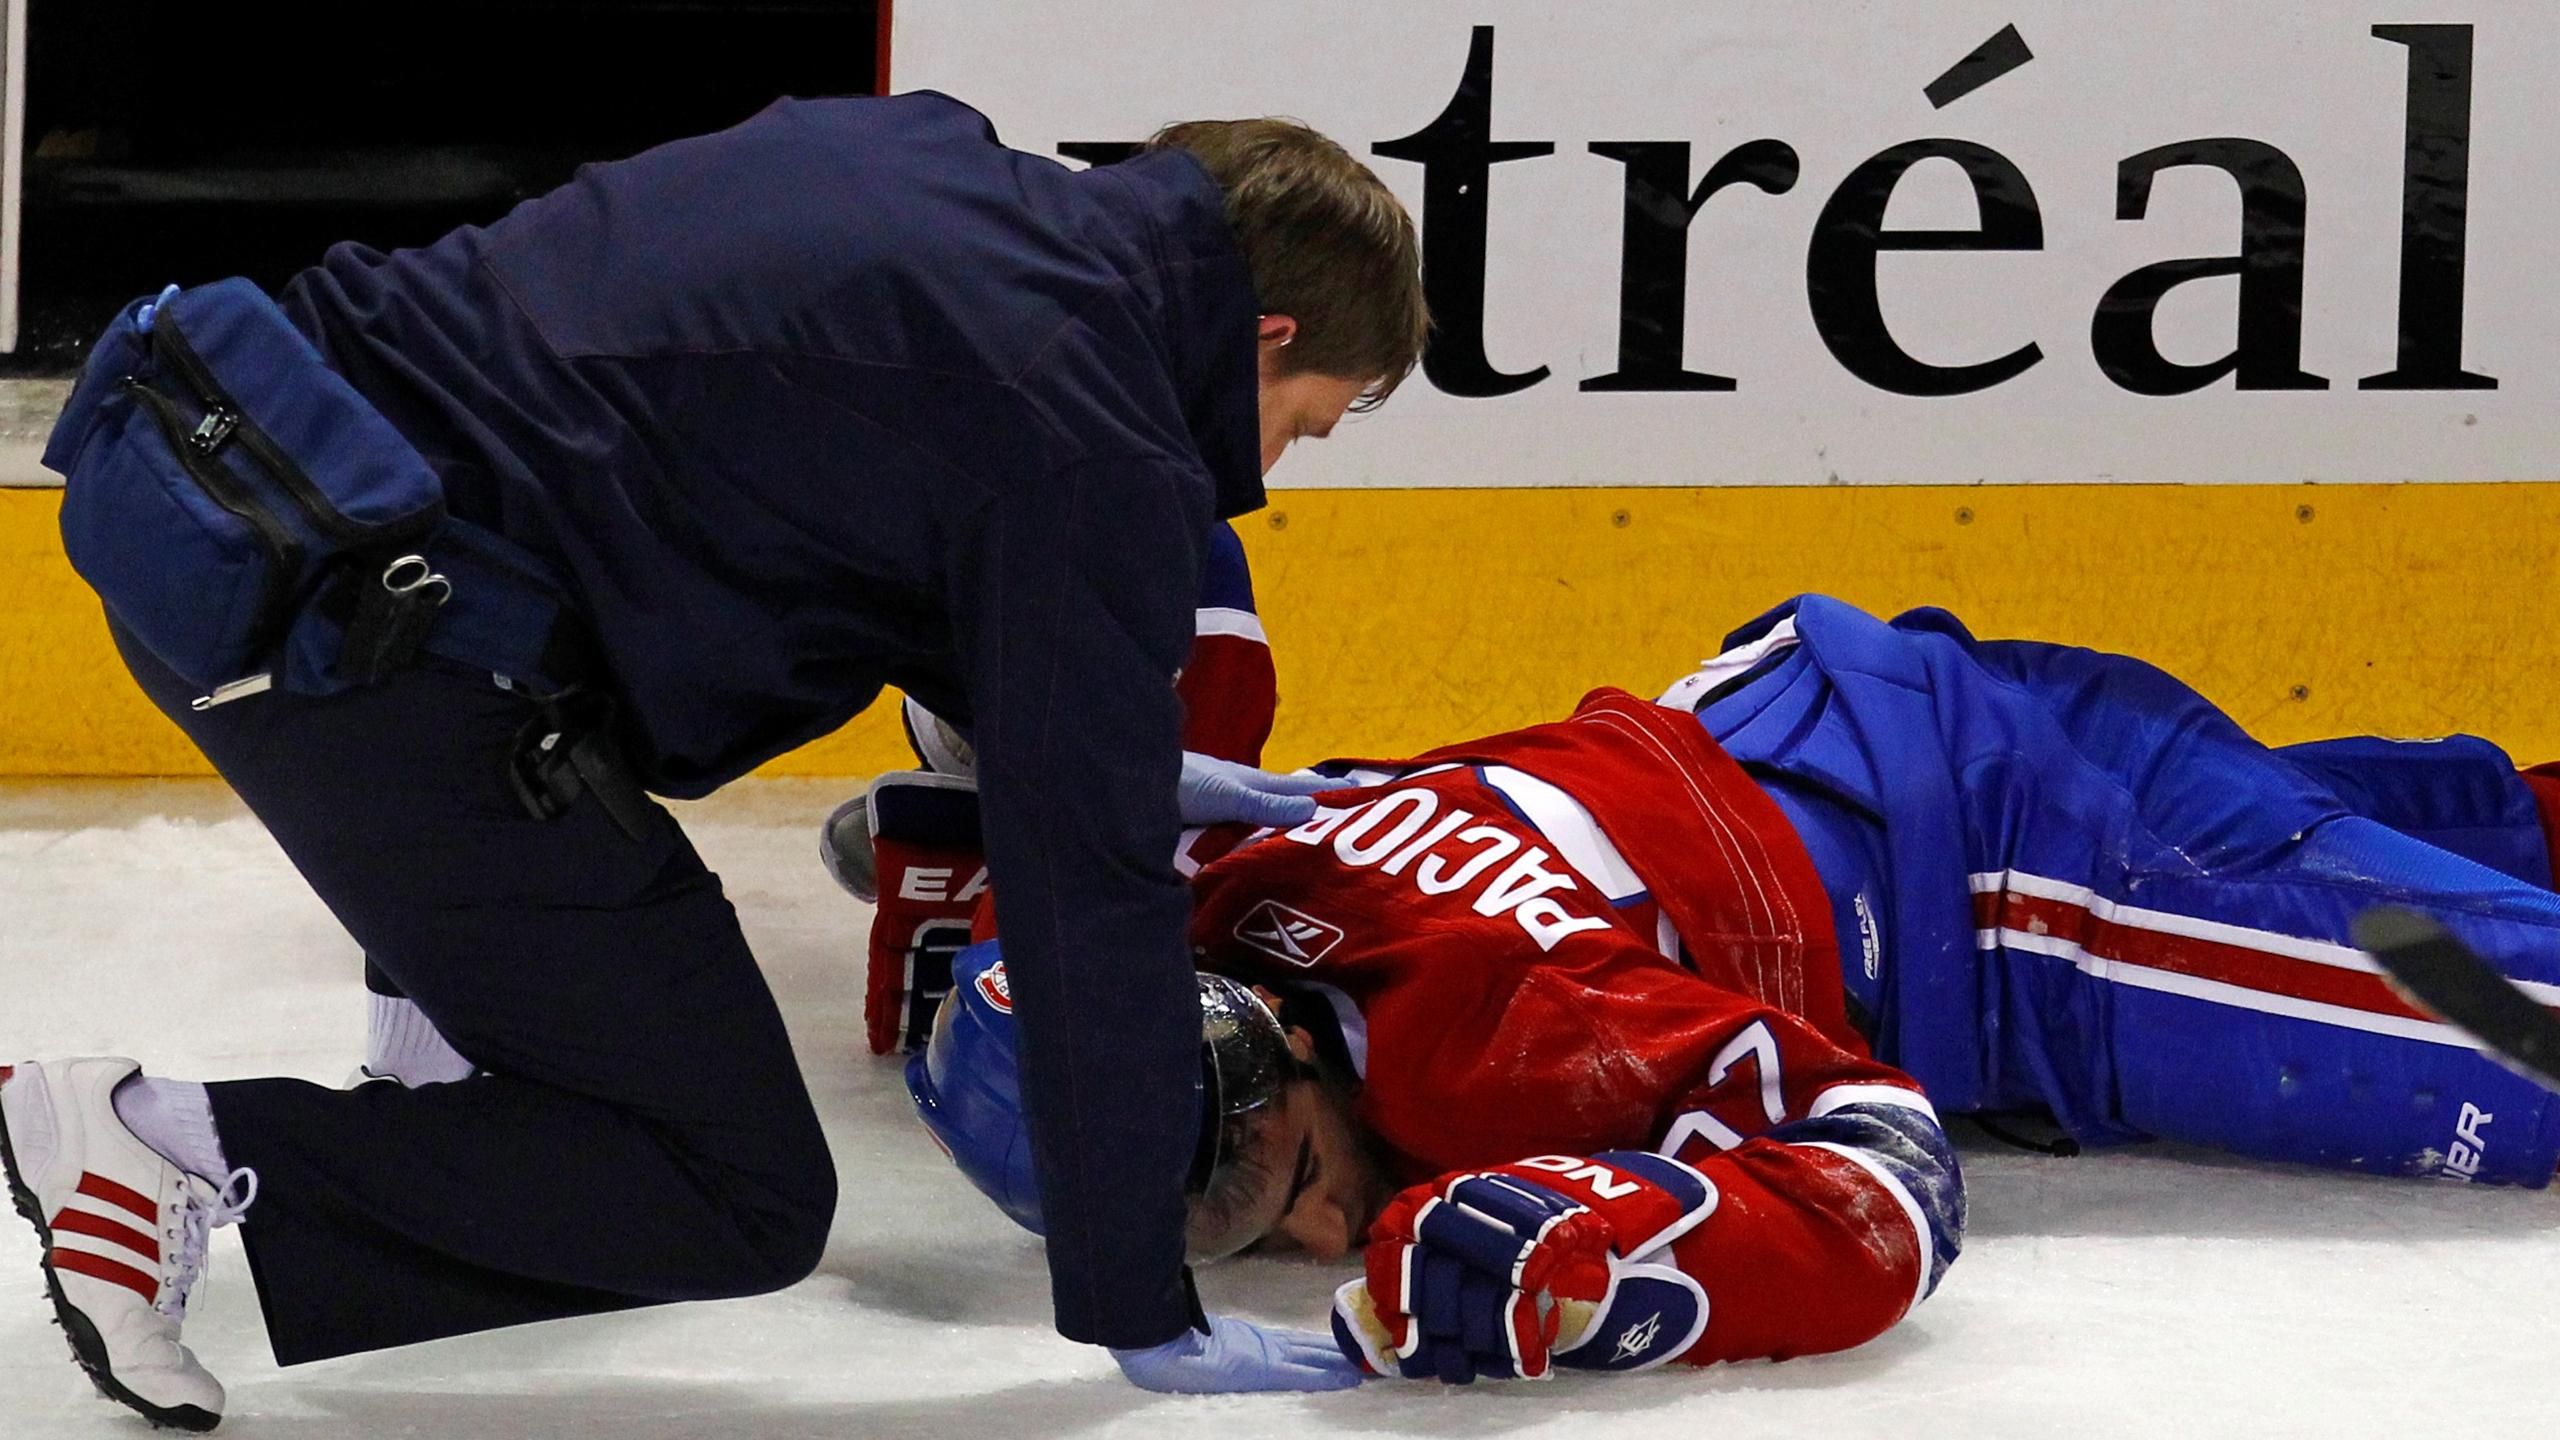 Following knee injury, have we seen last of Max Pacioretty with